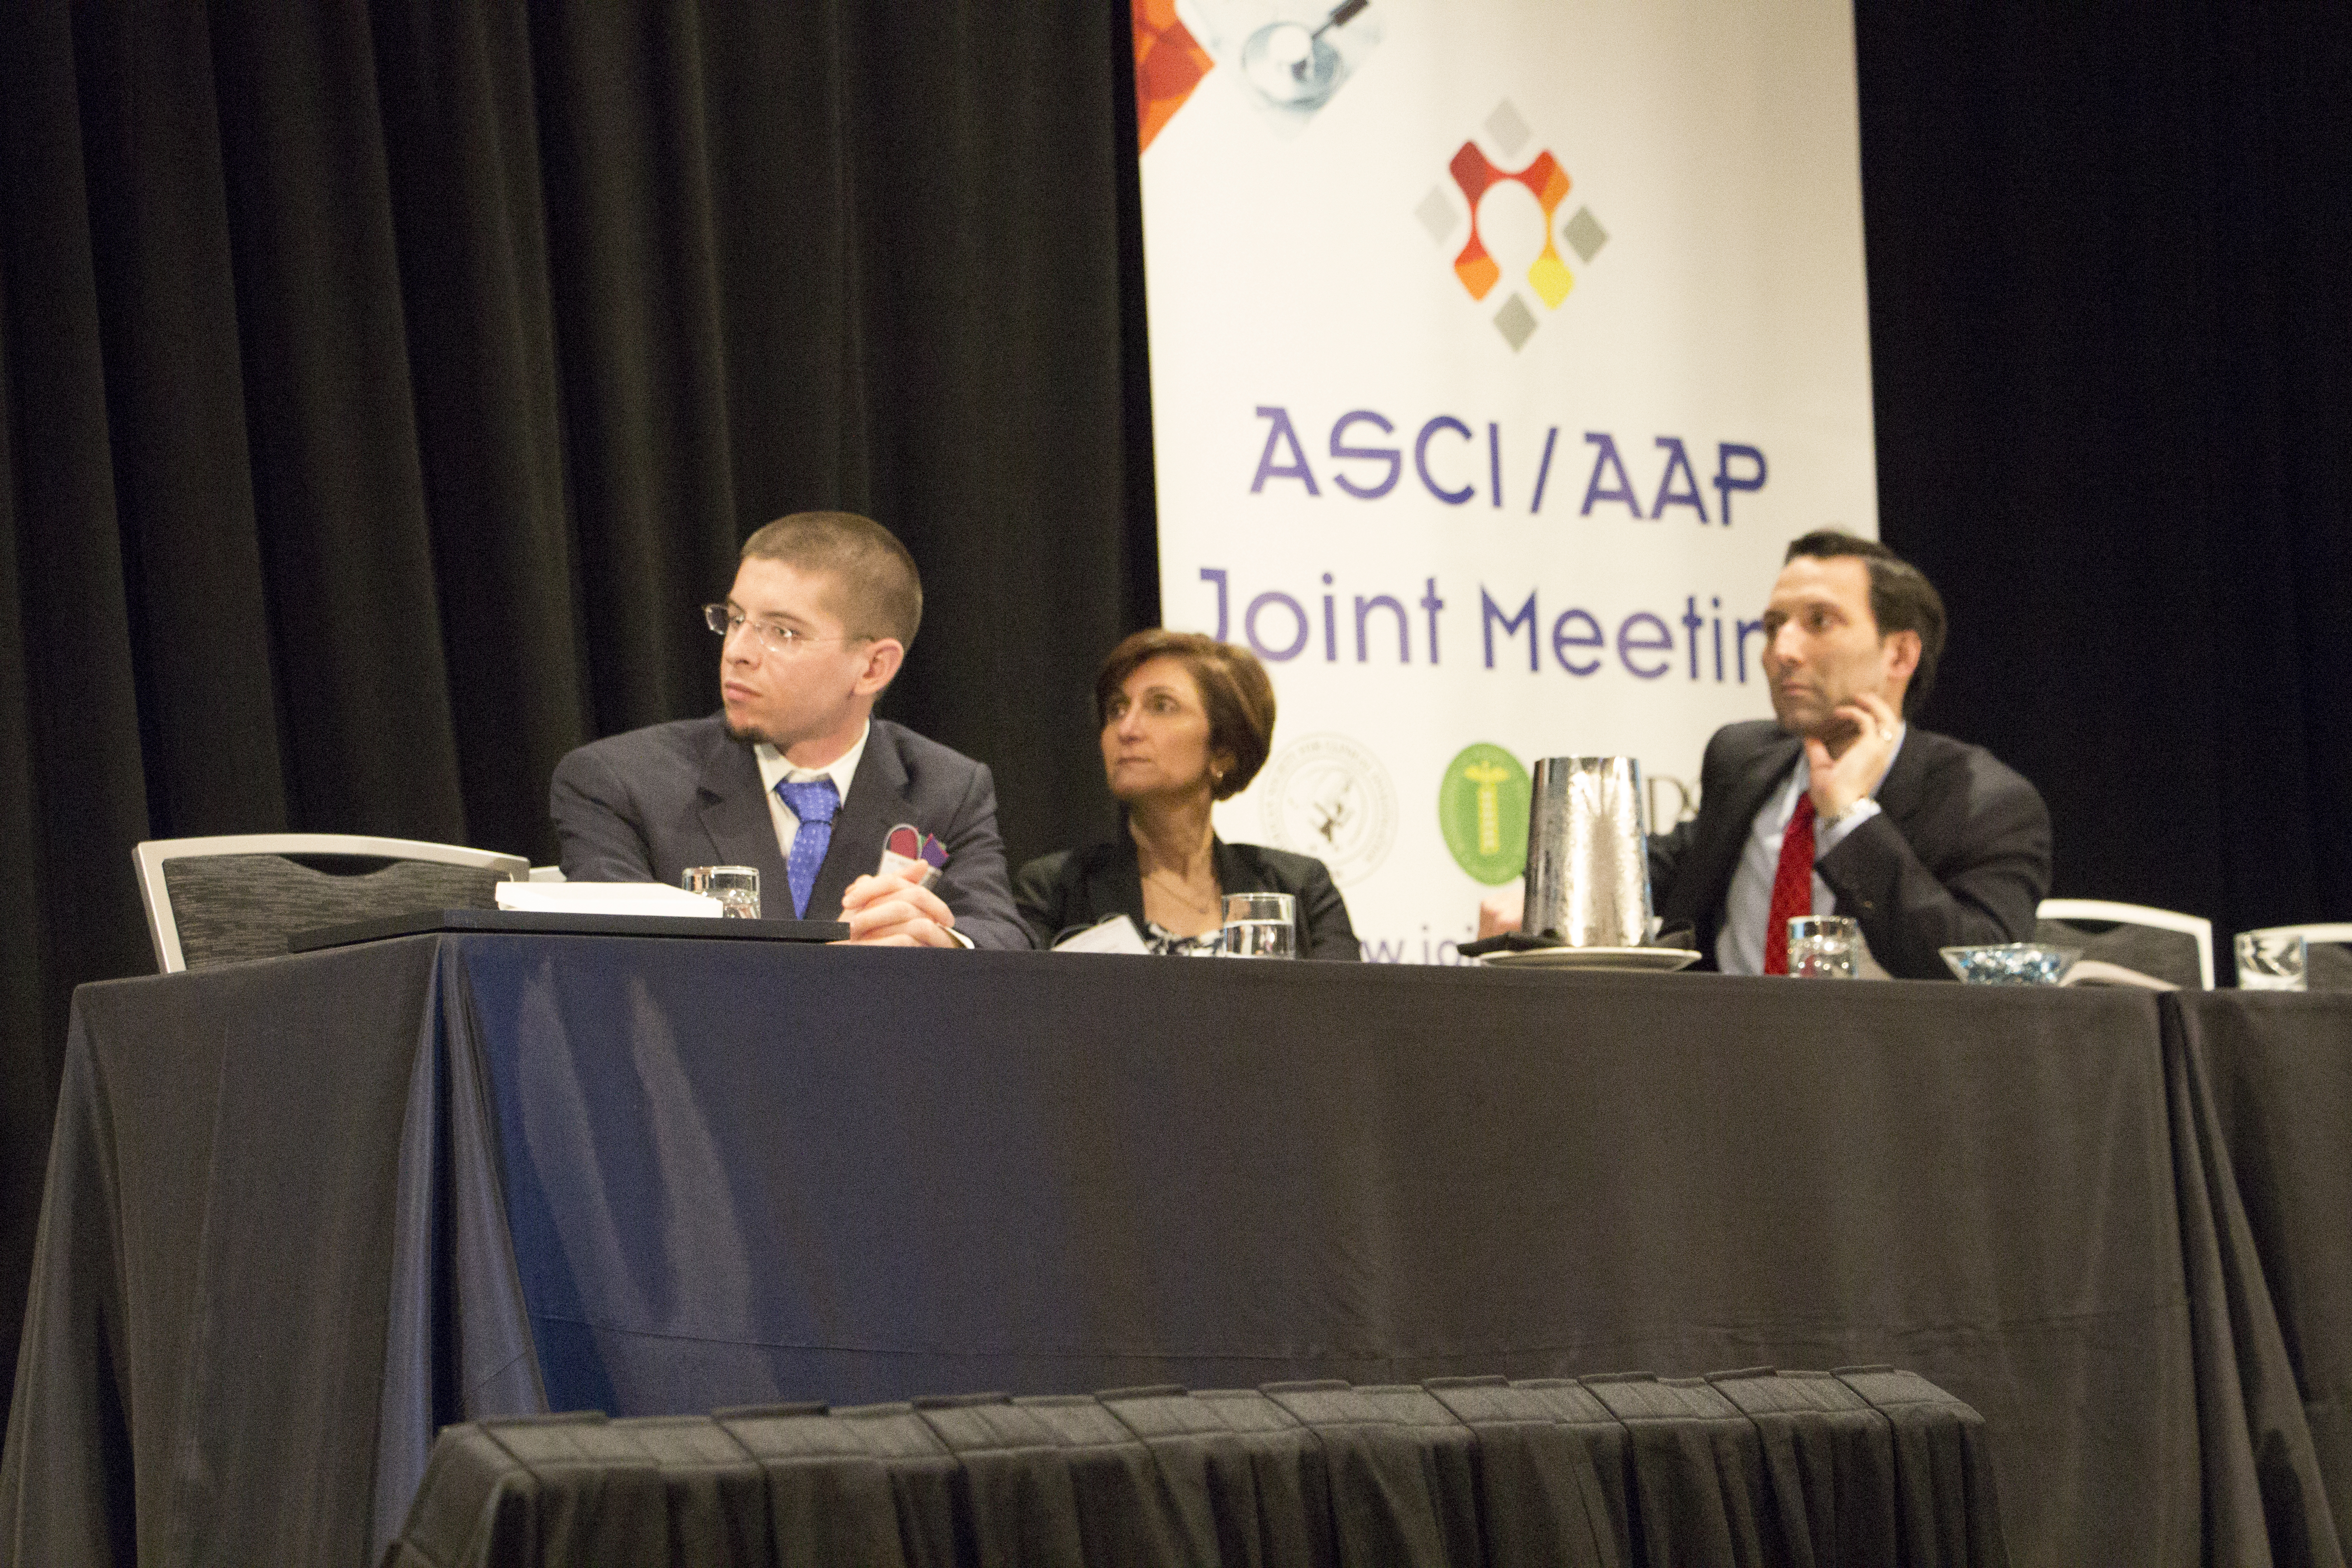 UConn MD/PhD student and APSA President-Elect Alex Adami co-moderating the “Cool Tools and Forward Technology” plenary session of the AAP-ASCI-APSA Joint Meeting.